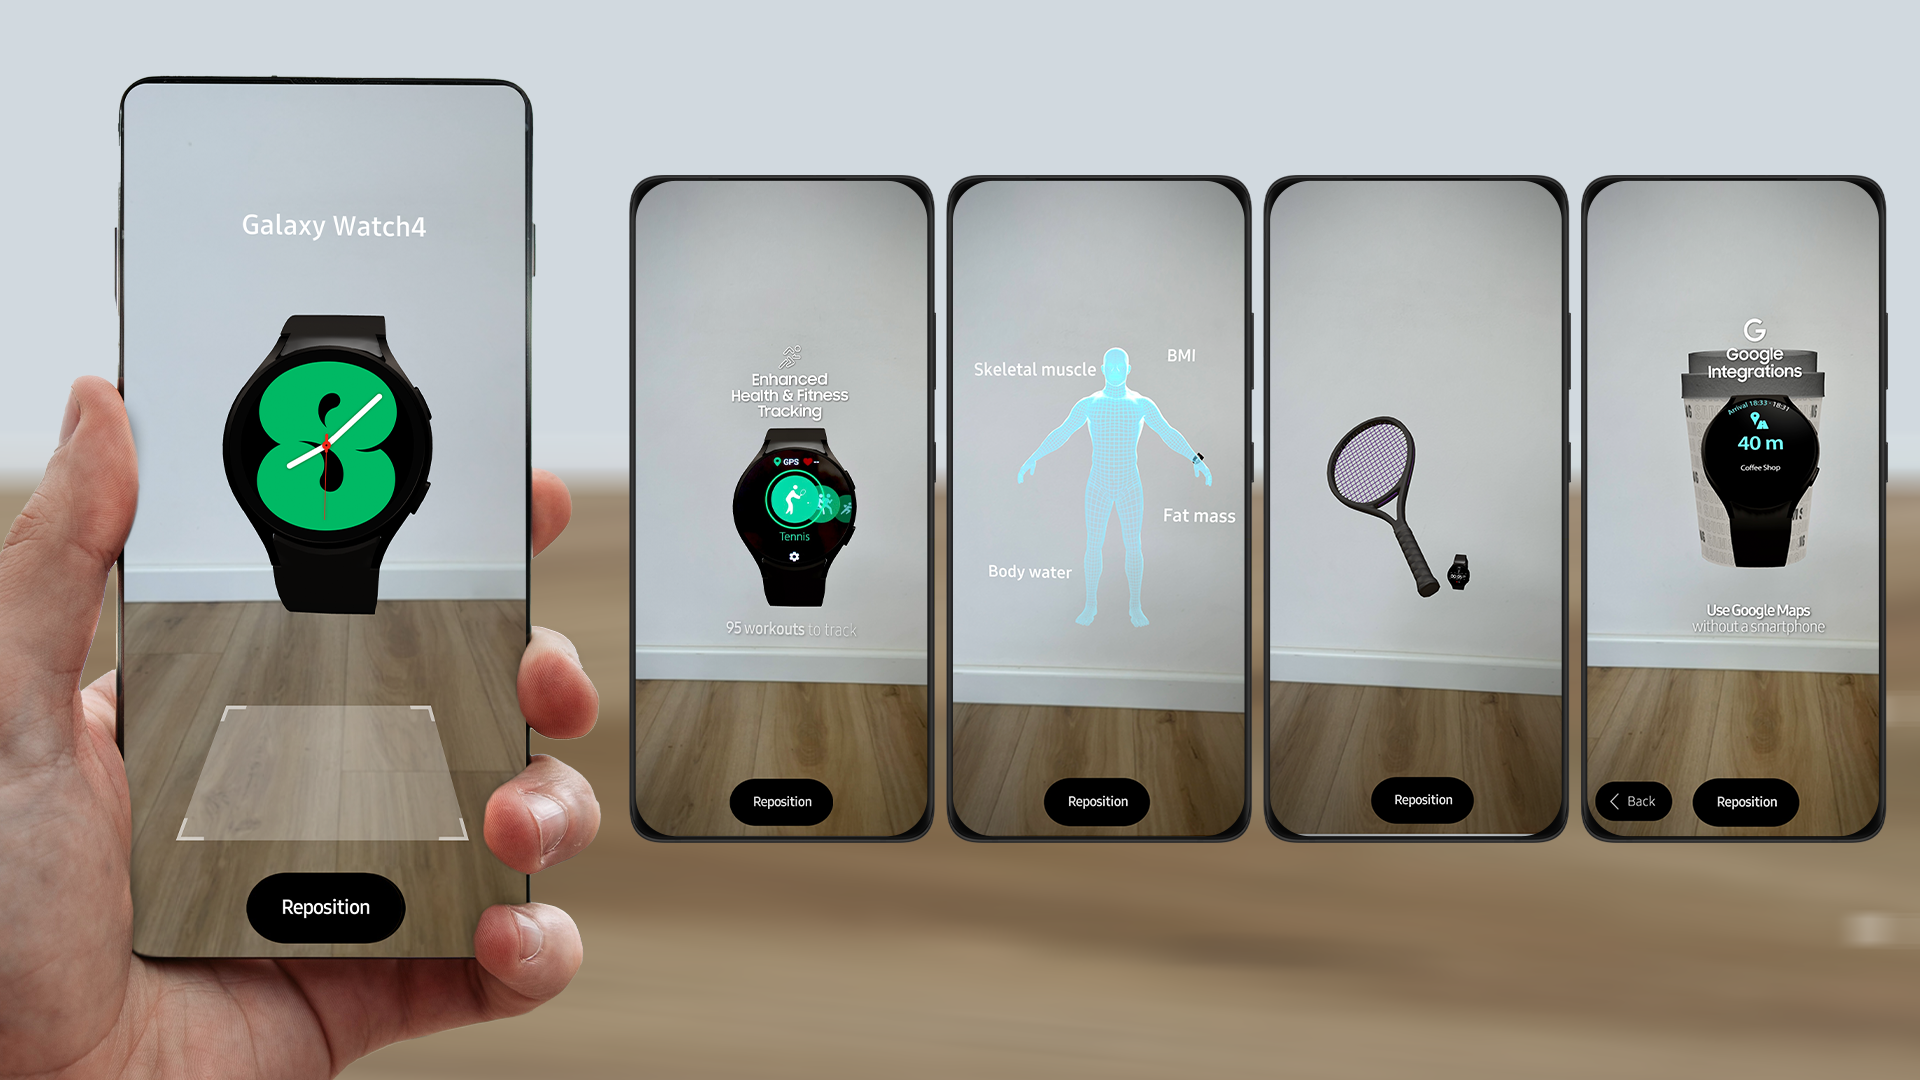 Galaxy Watch4 Augmented Reality Experience displayed on several phone screens.